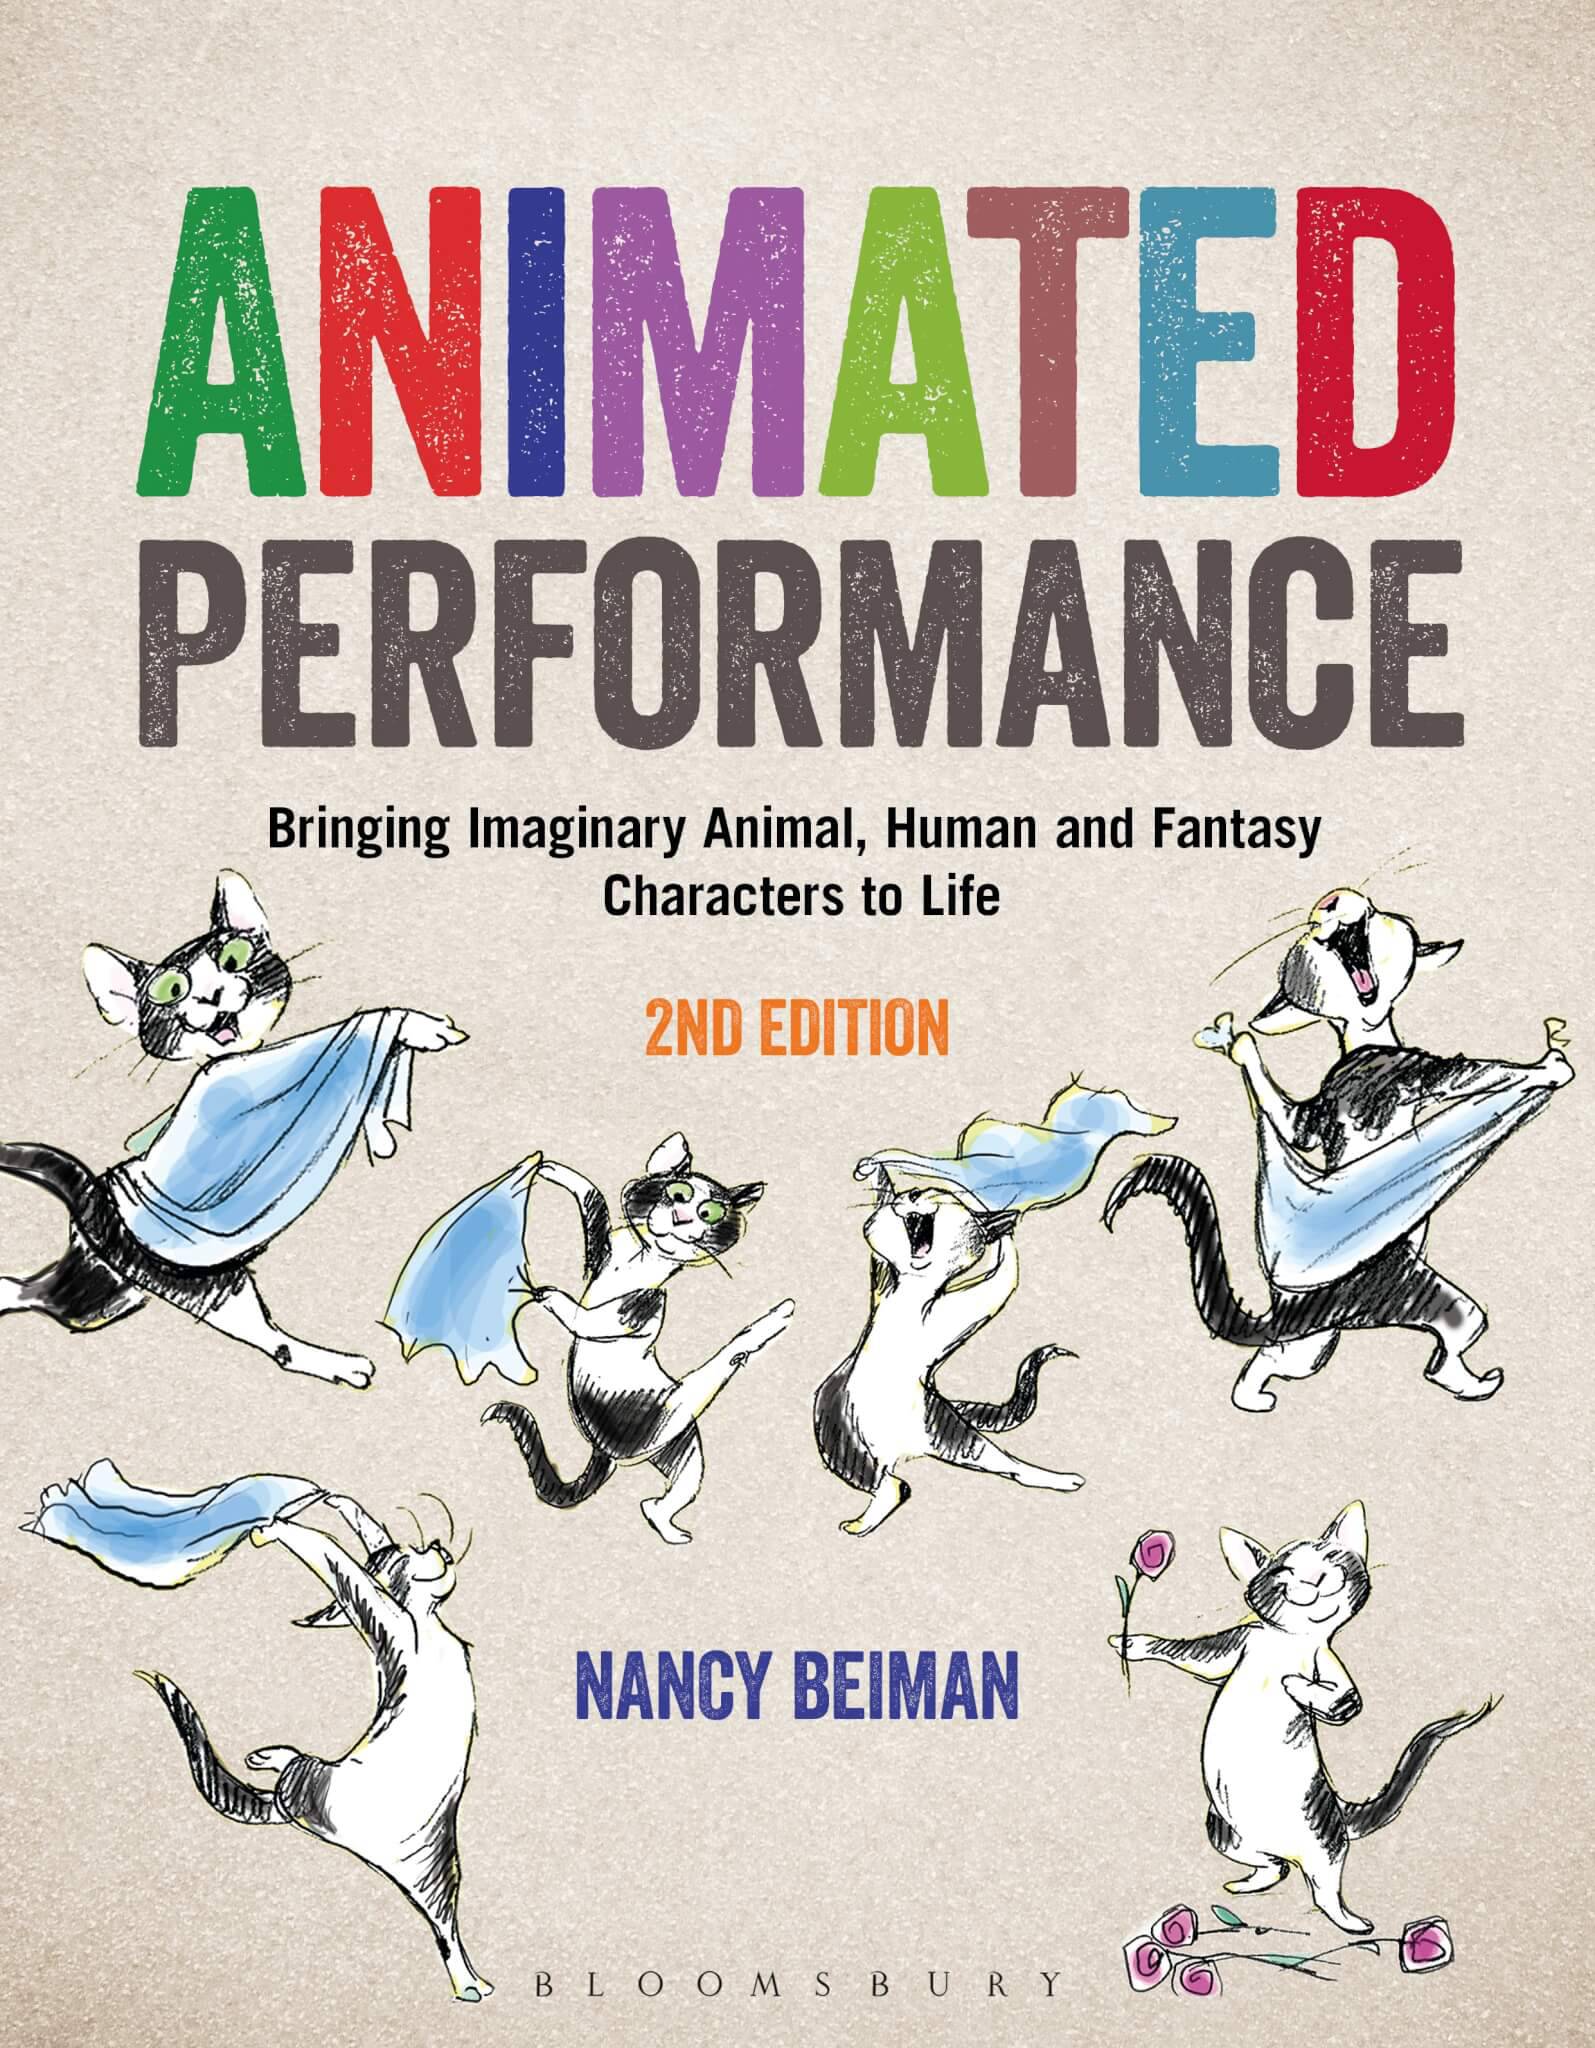 Review - Animated Performance (Second Edition) by Nancy Beiman - Skwigly  Animation Magazine